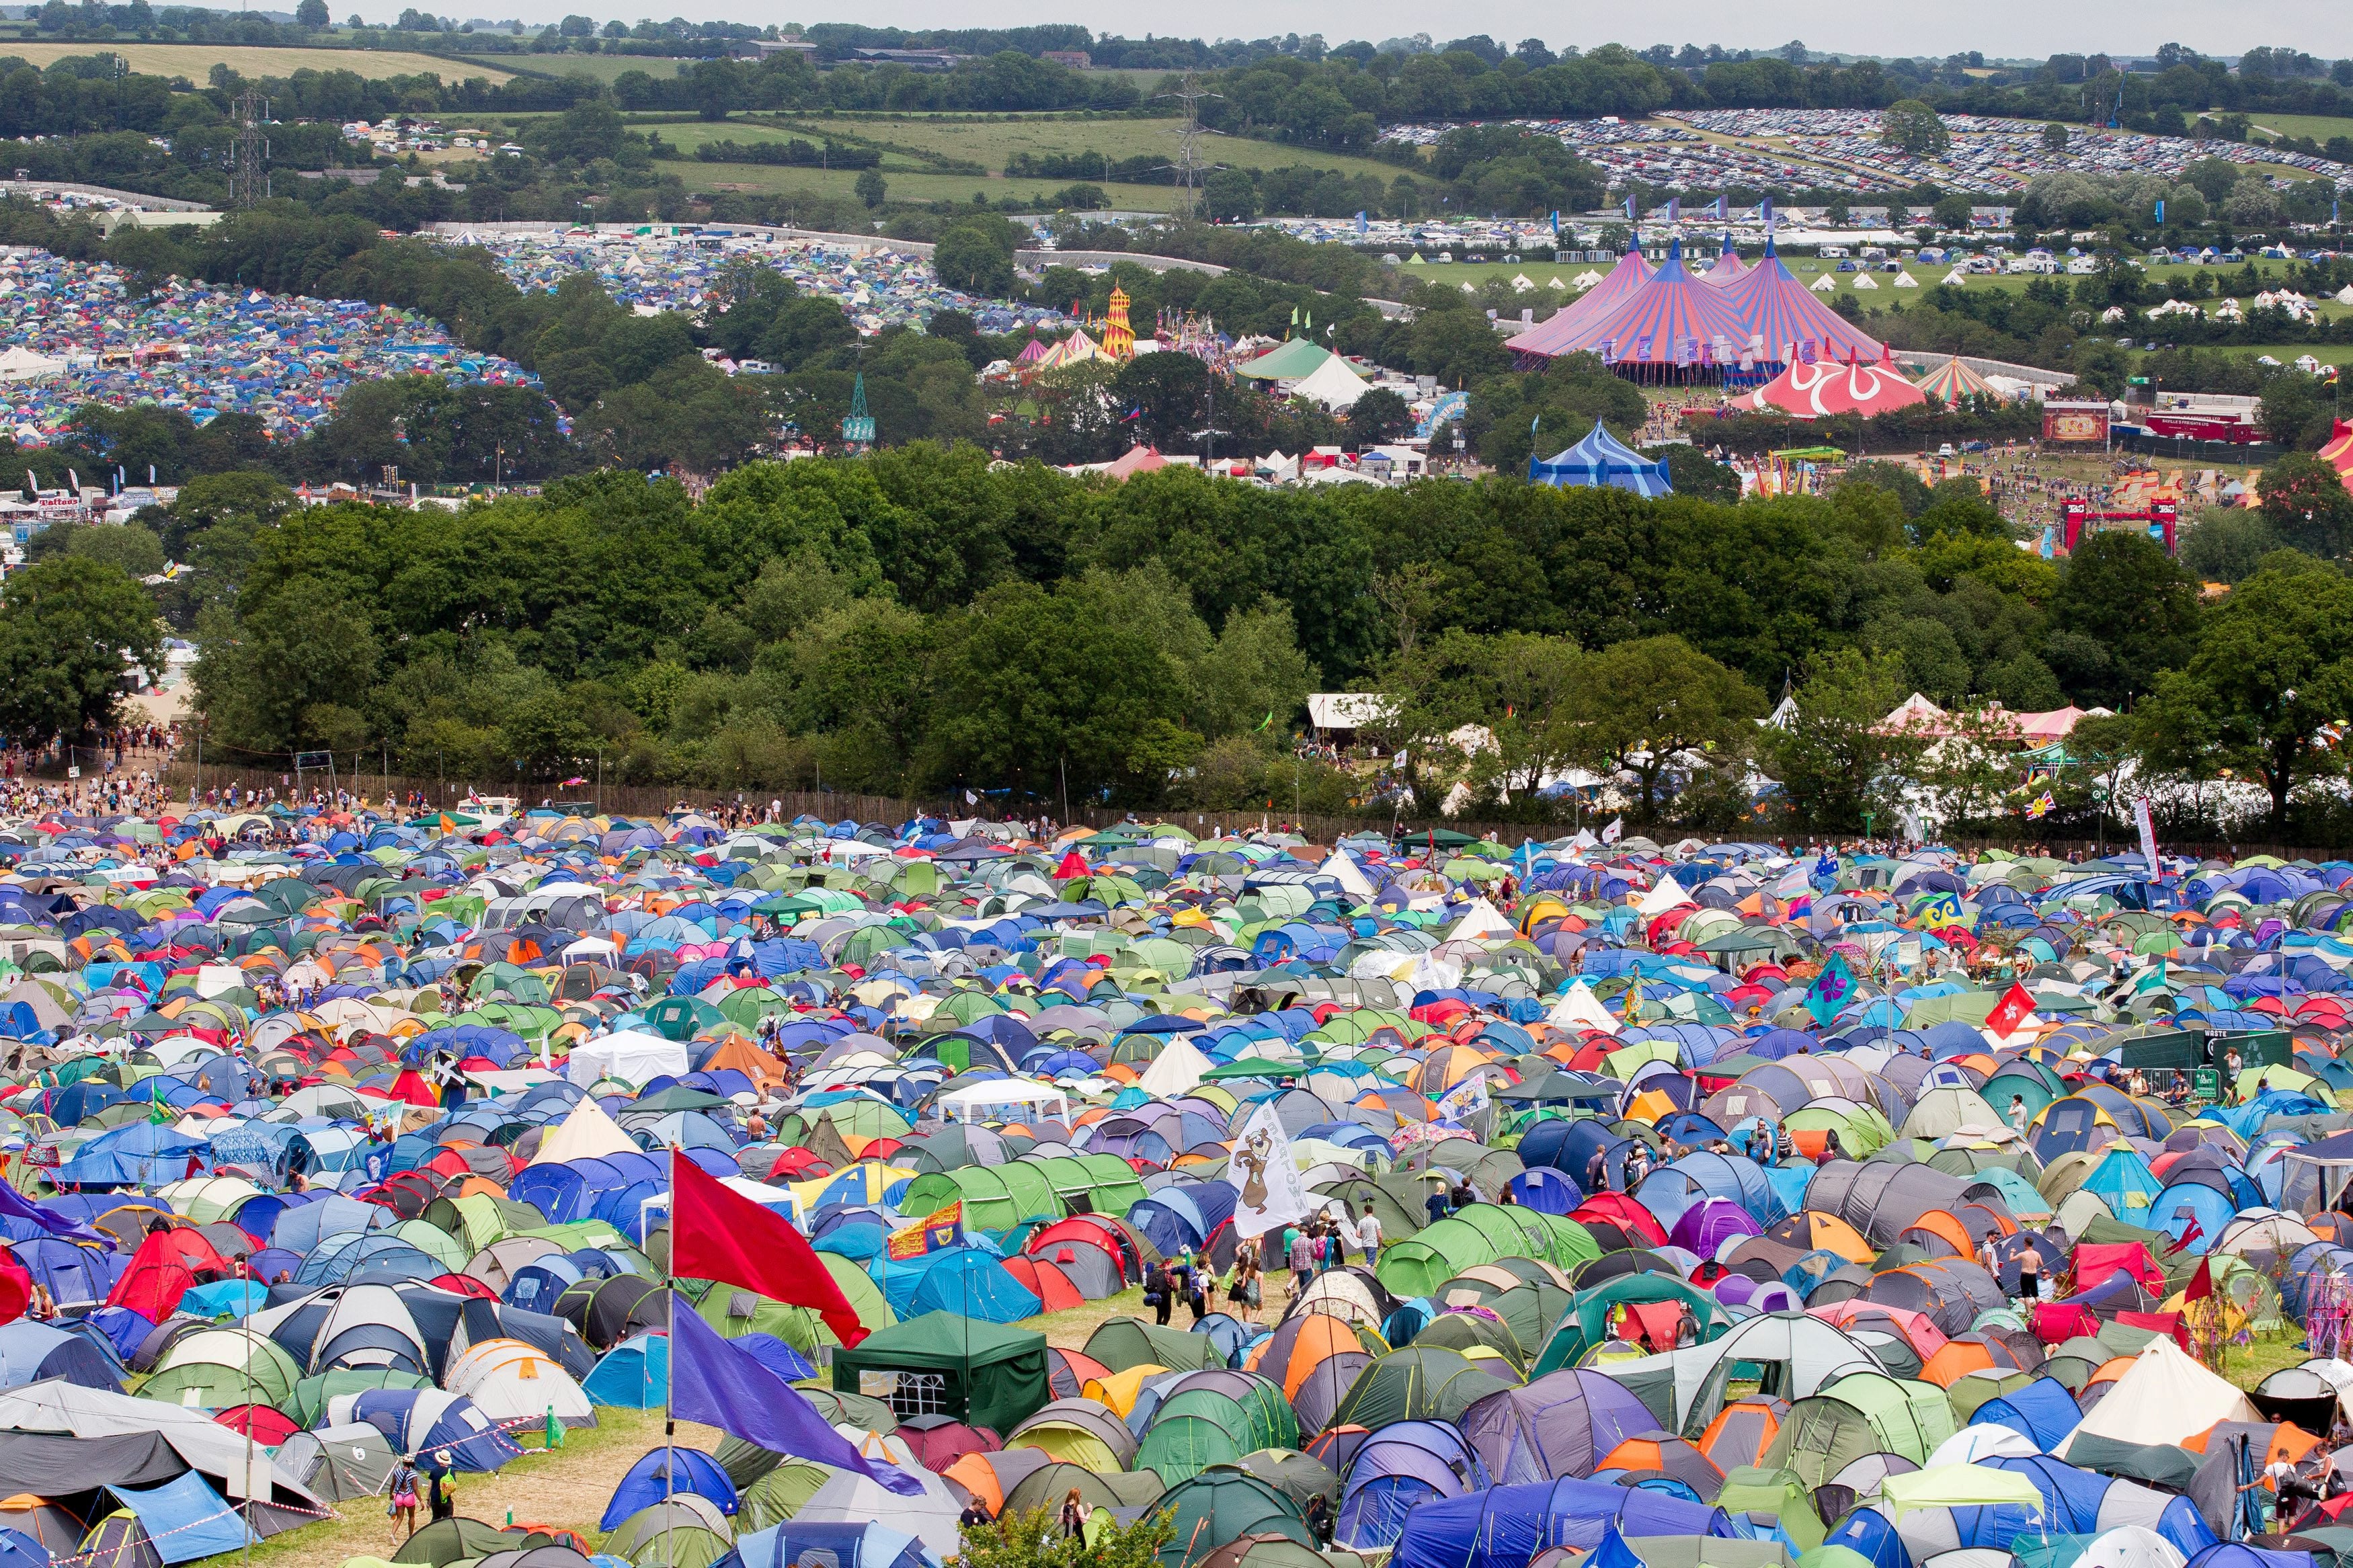 After two years of cancellations and chaos, festivals are back on track